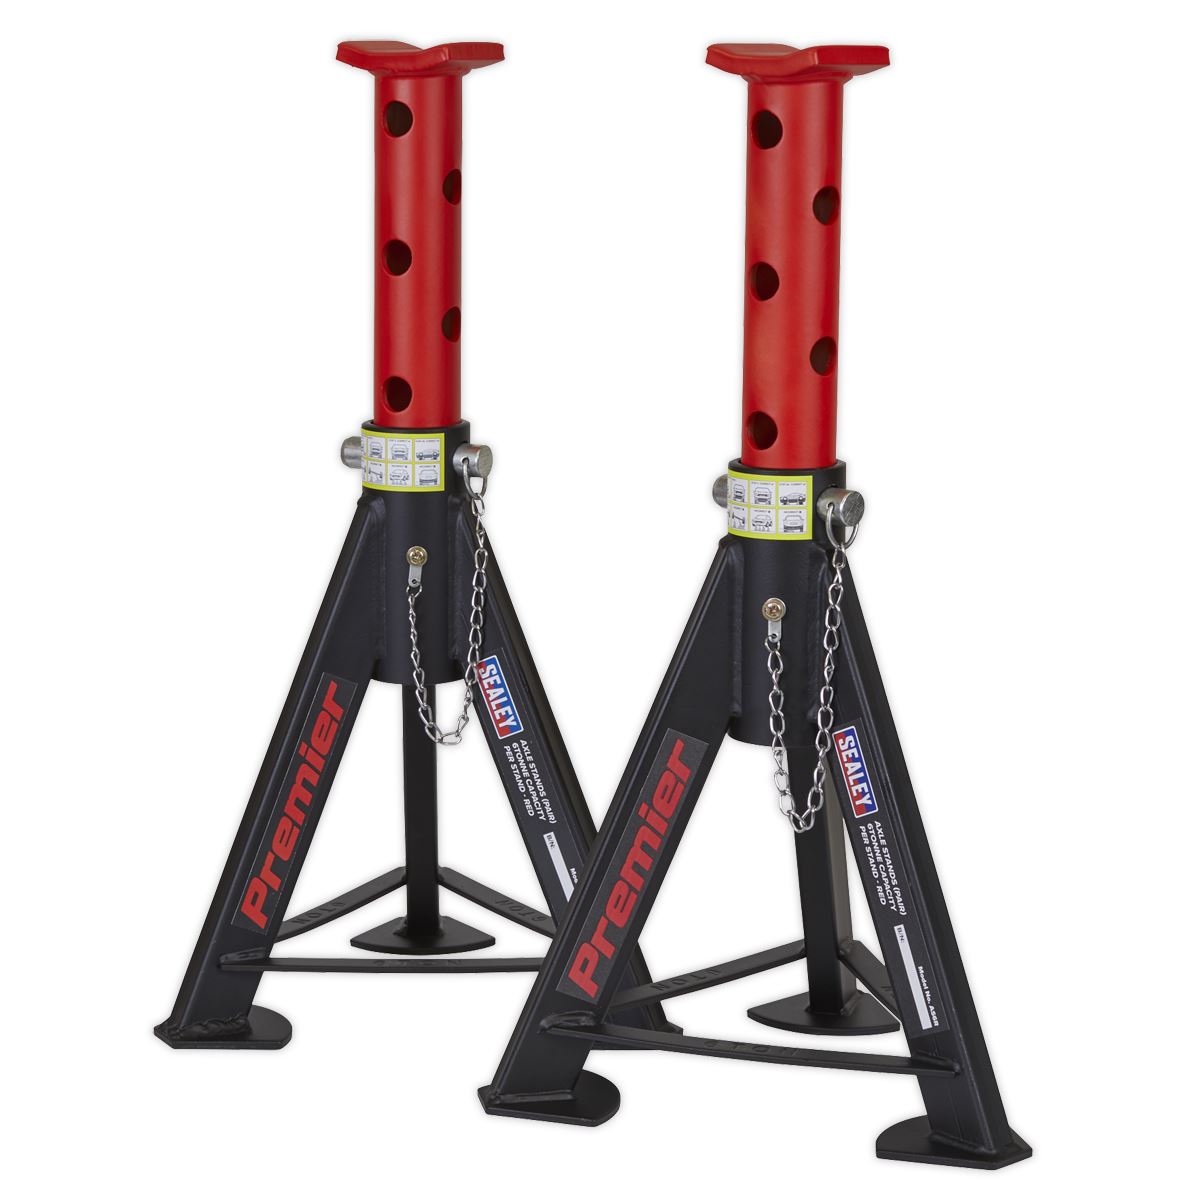 Sealey Premier Axle Stands (Pair) 6 Tonne Capacity per Stand - Red